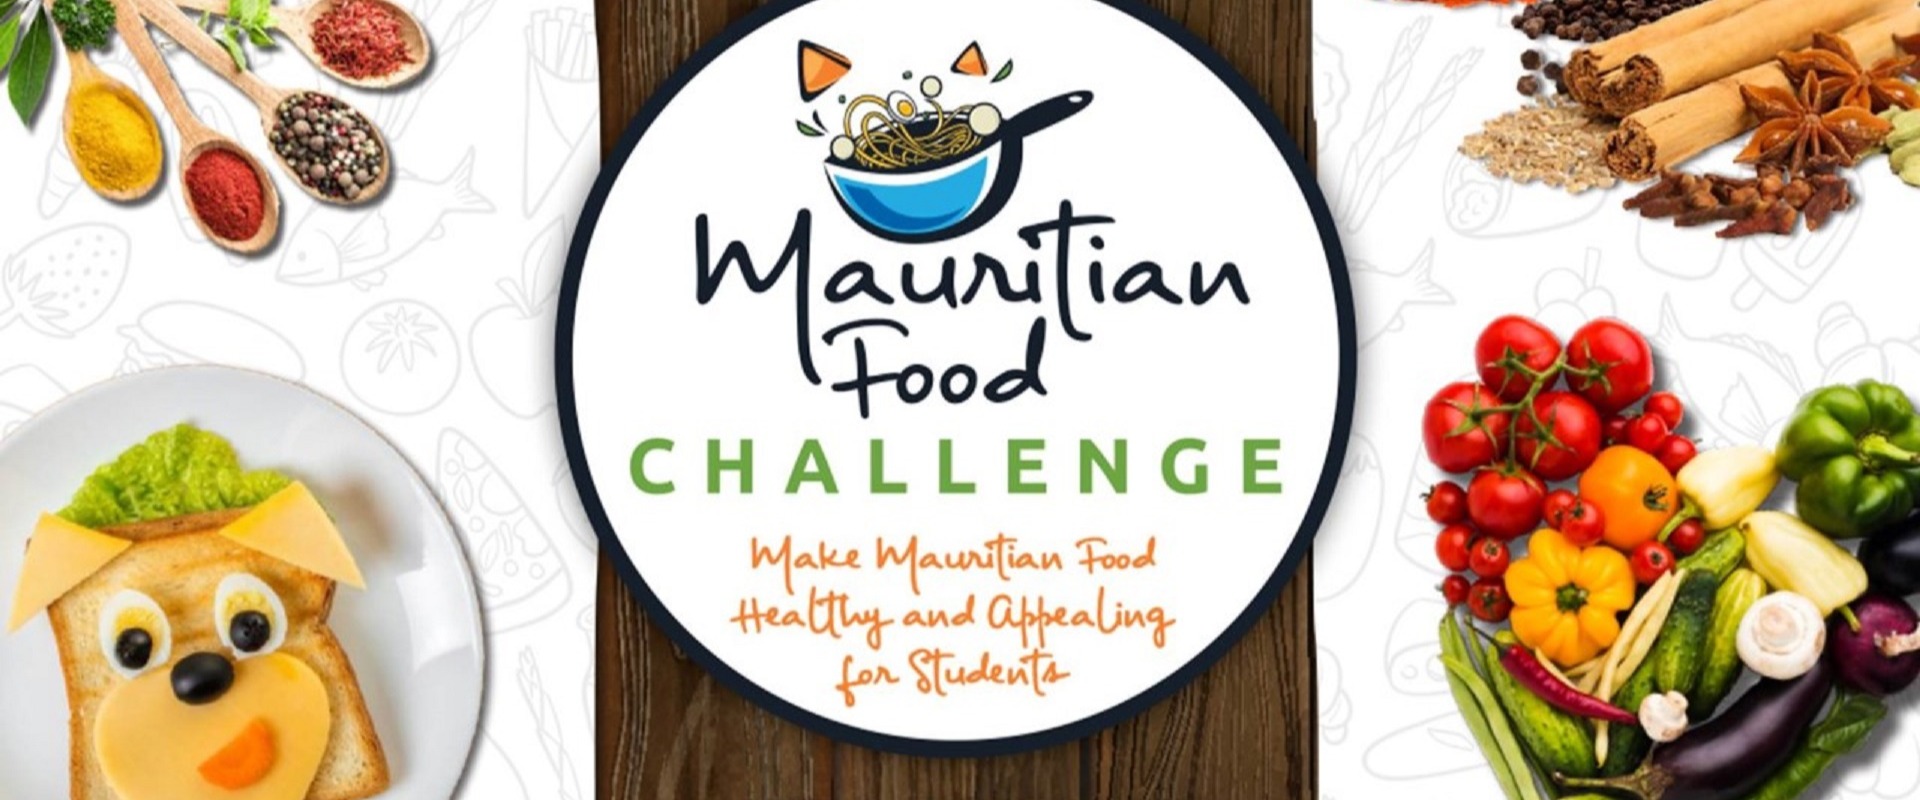 Participate in the Mauritian Food Challenge!